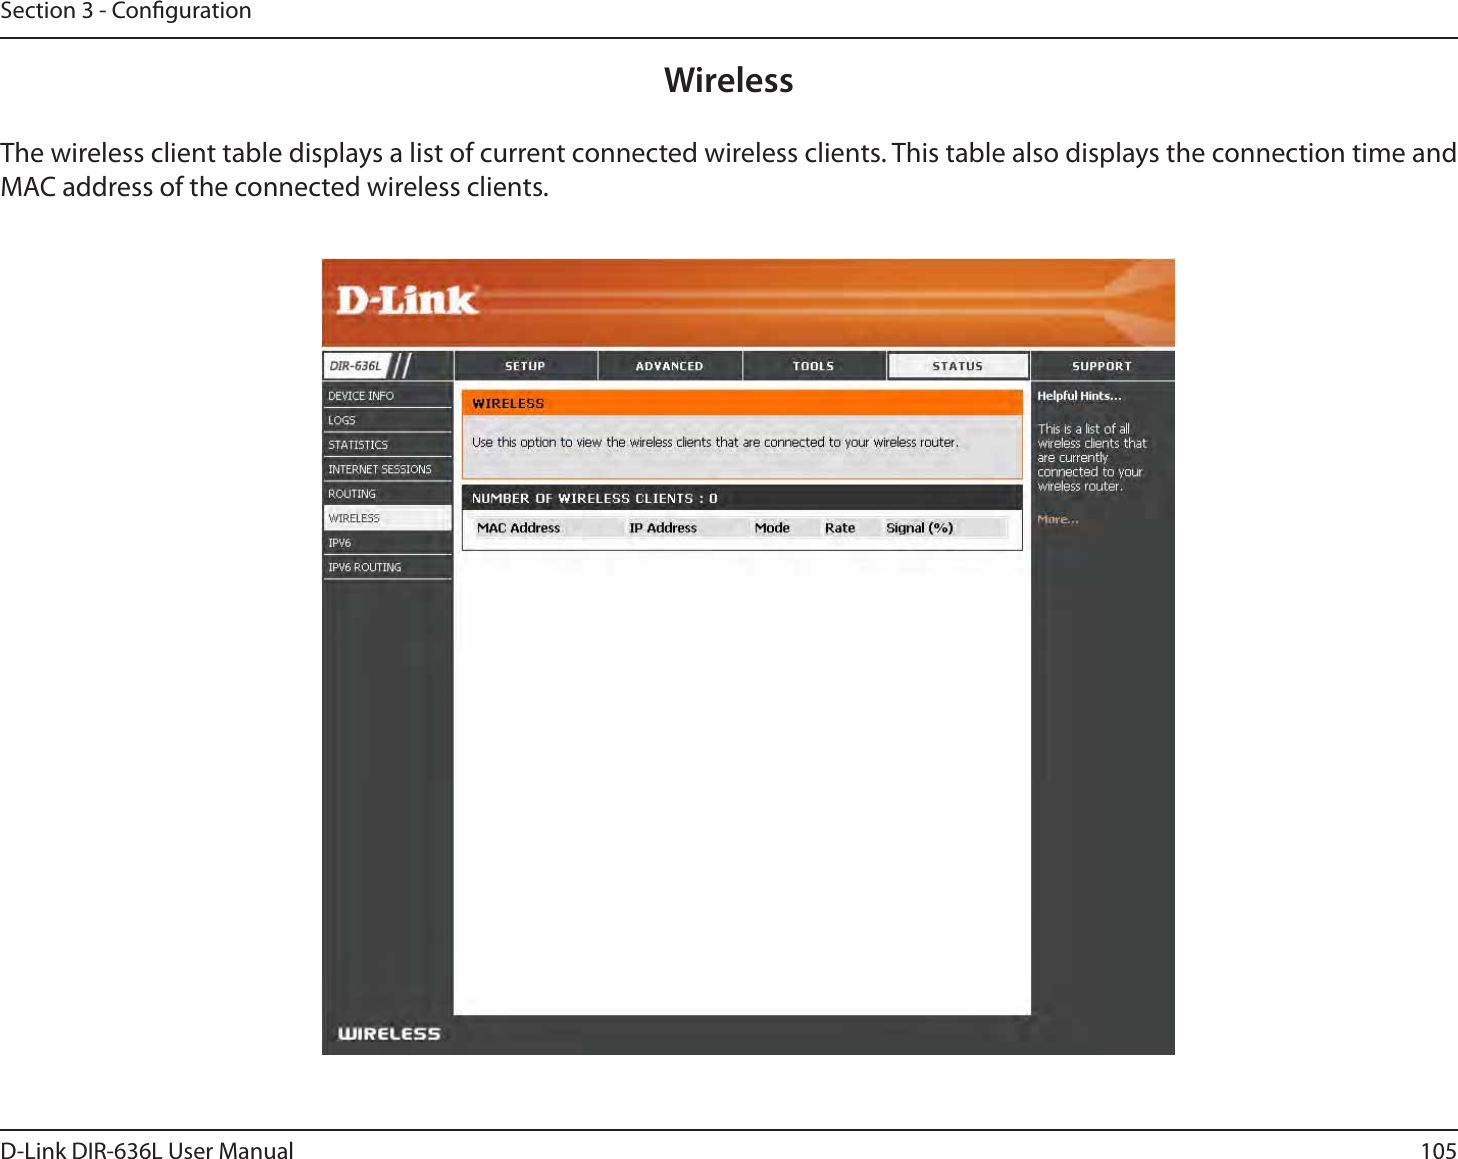 105D-Link DIR-636L User ManualSection 3 - CongurationThe wireless client table displays a list of current connected wireless clients. This table also displays the connection time and MAC address of the connected wireless clients.Wireless